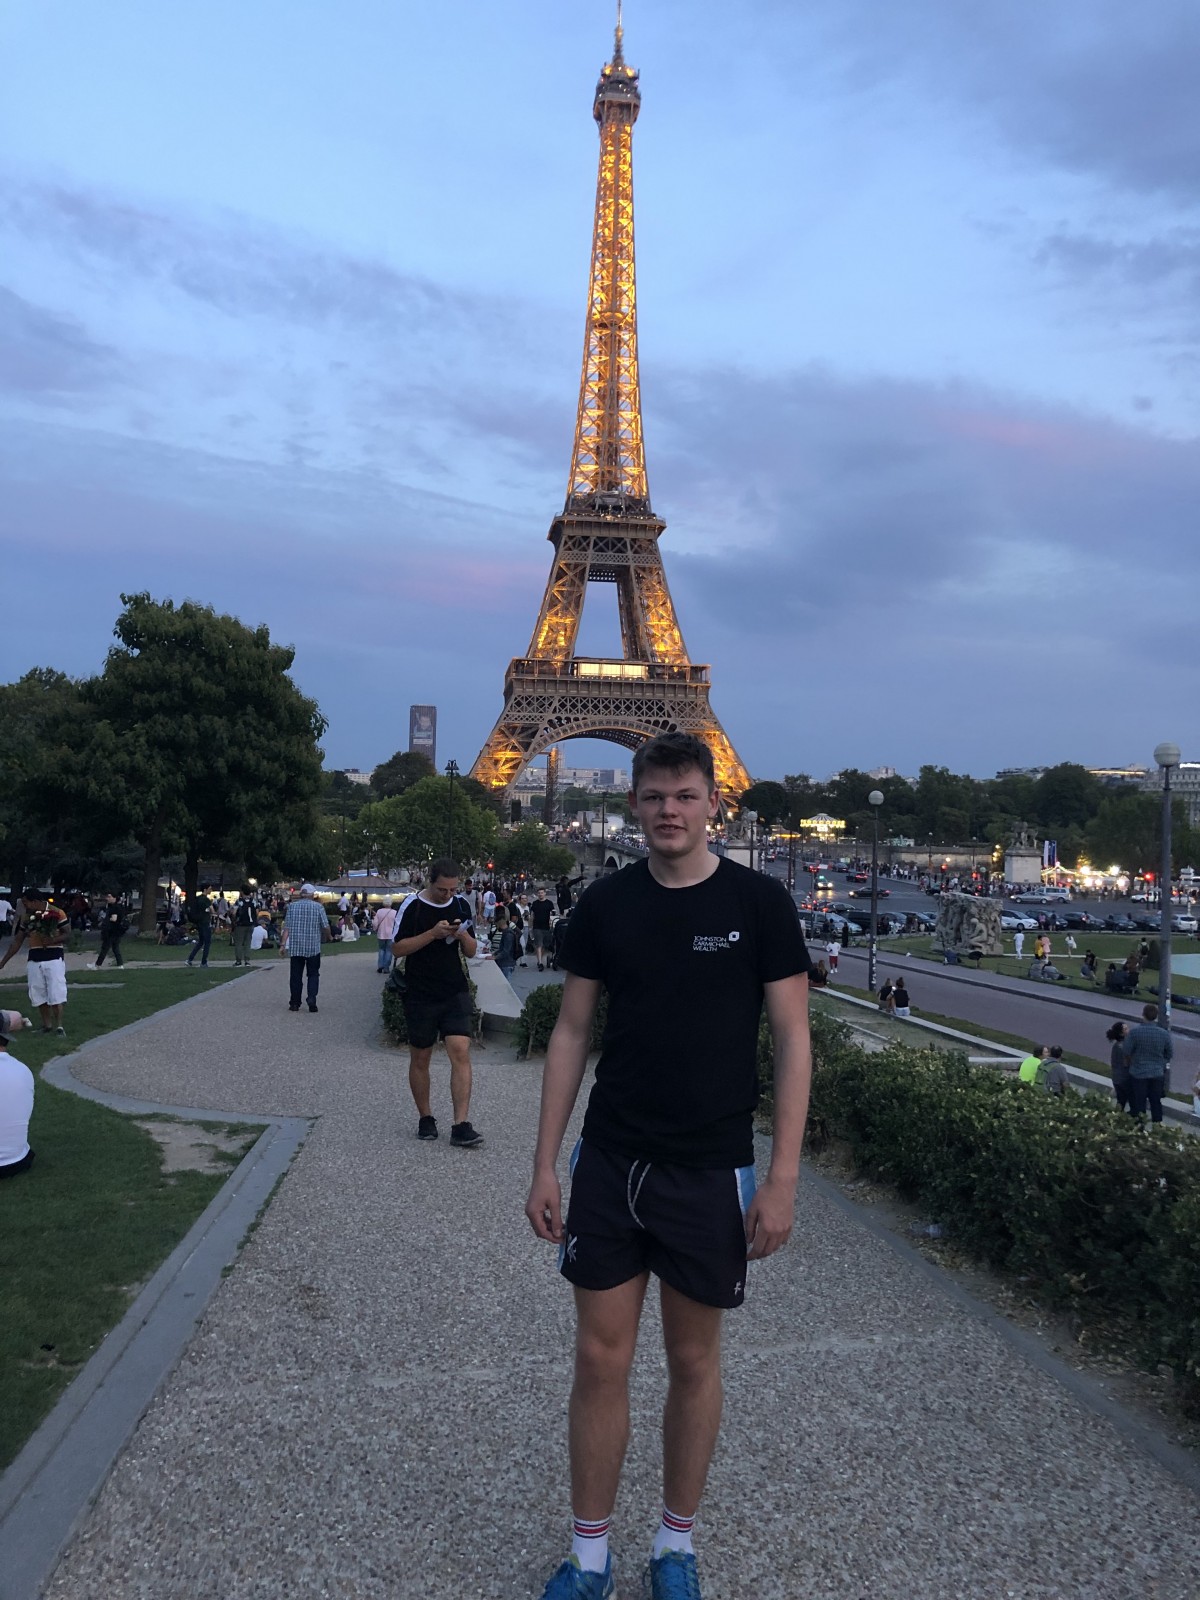 "Me standing nervously in front of the Eiffel Tower " - Olly